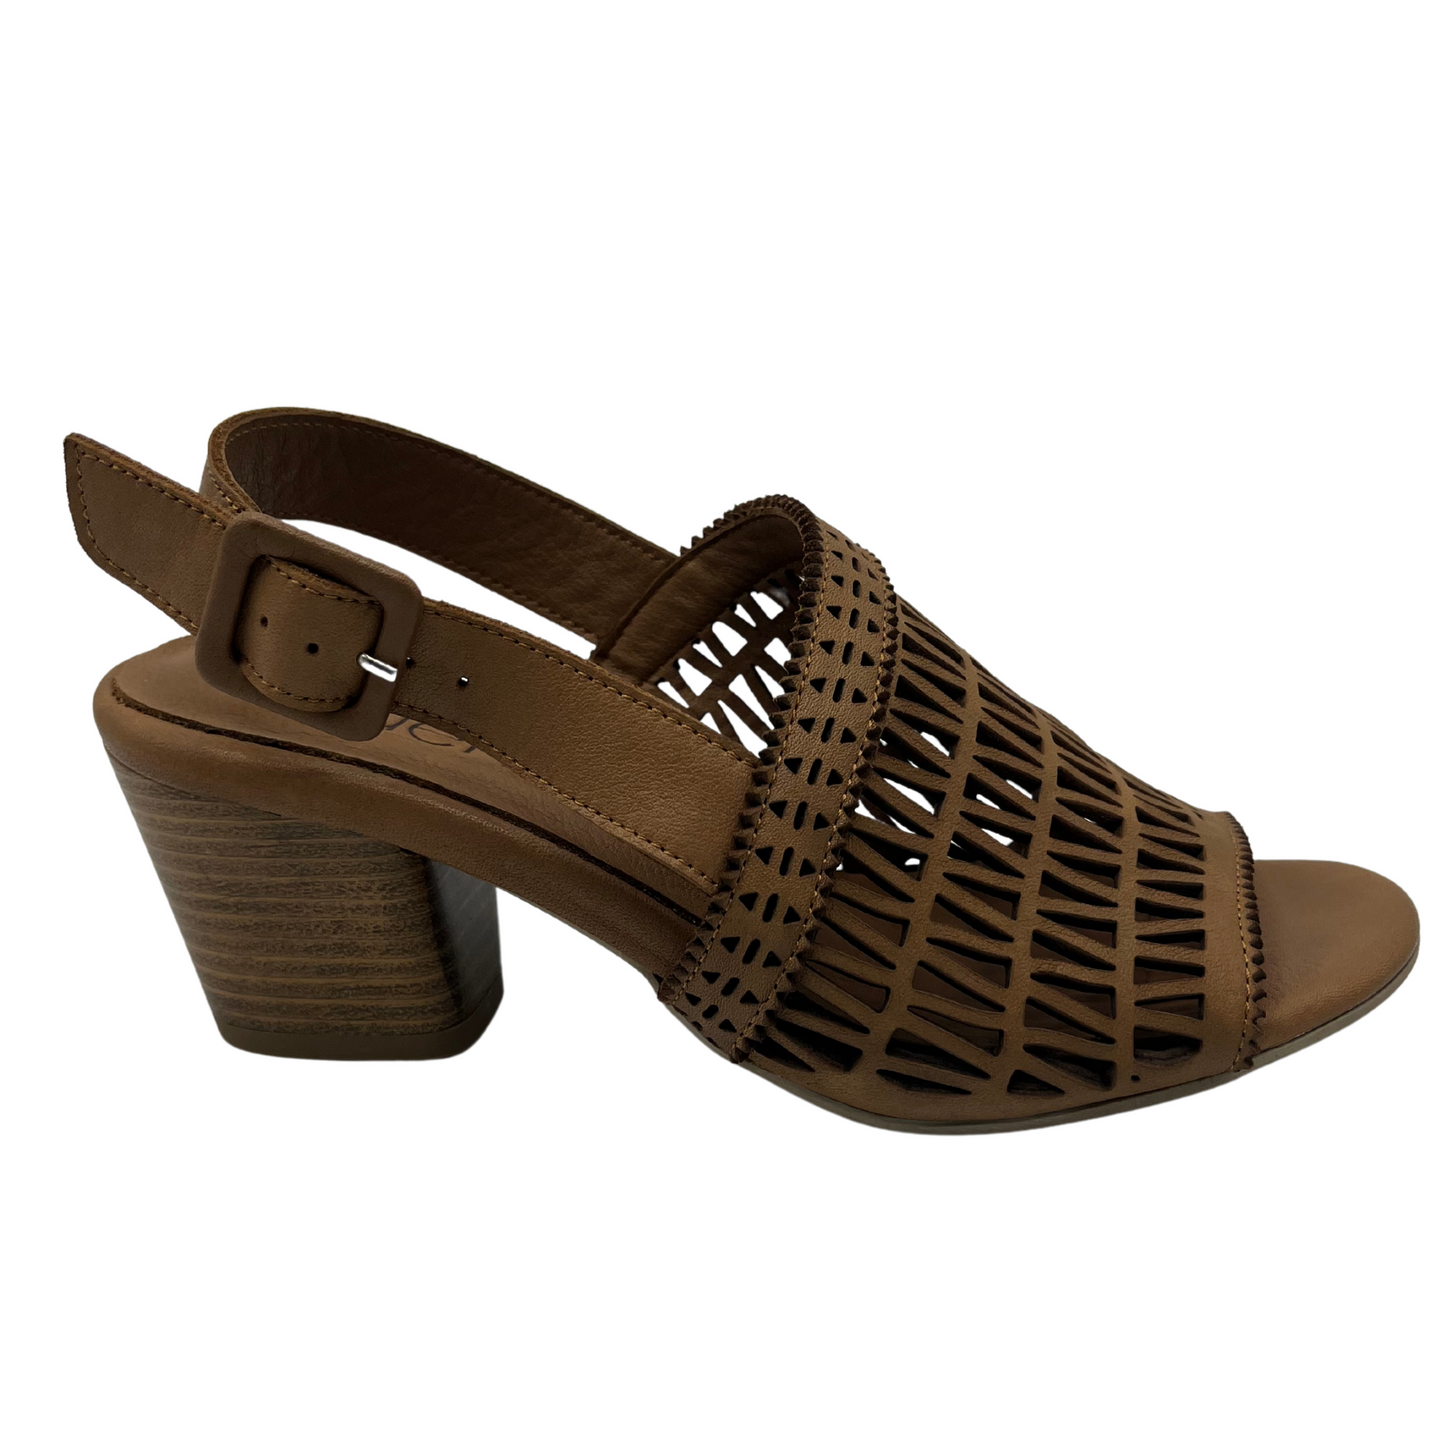 Right facing view of brown leather sandal with block heel and cutout details